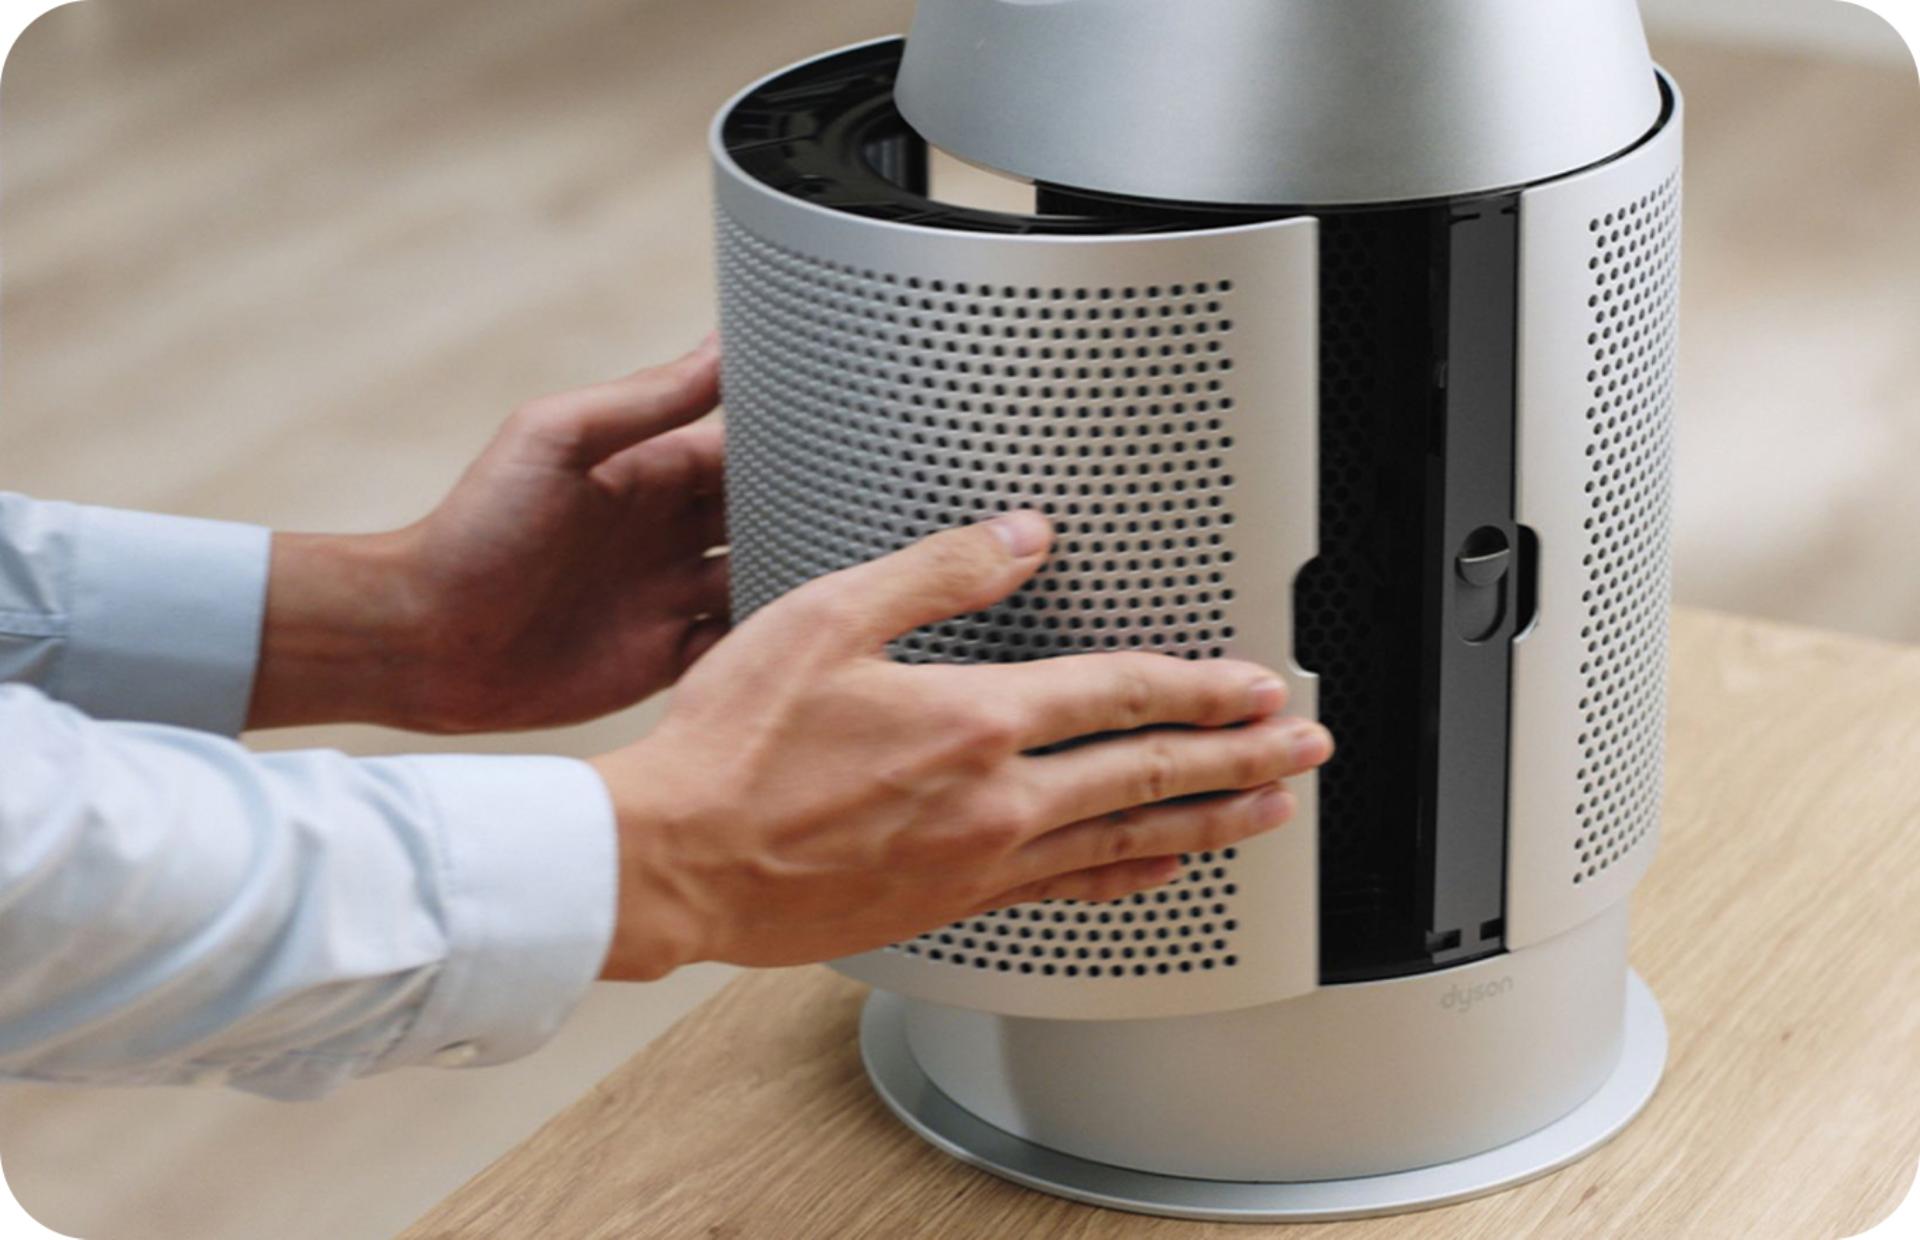 A close-up of a person opening up the body of a Dyson air purifier